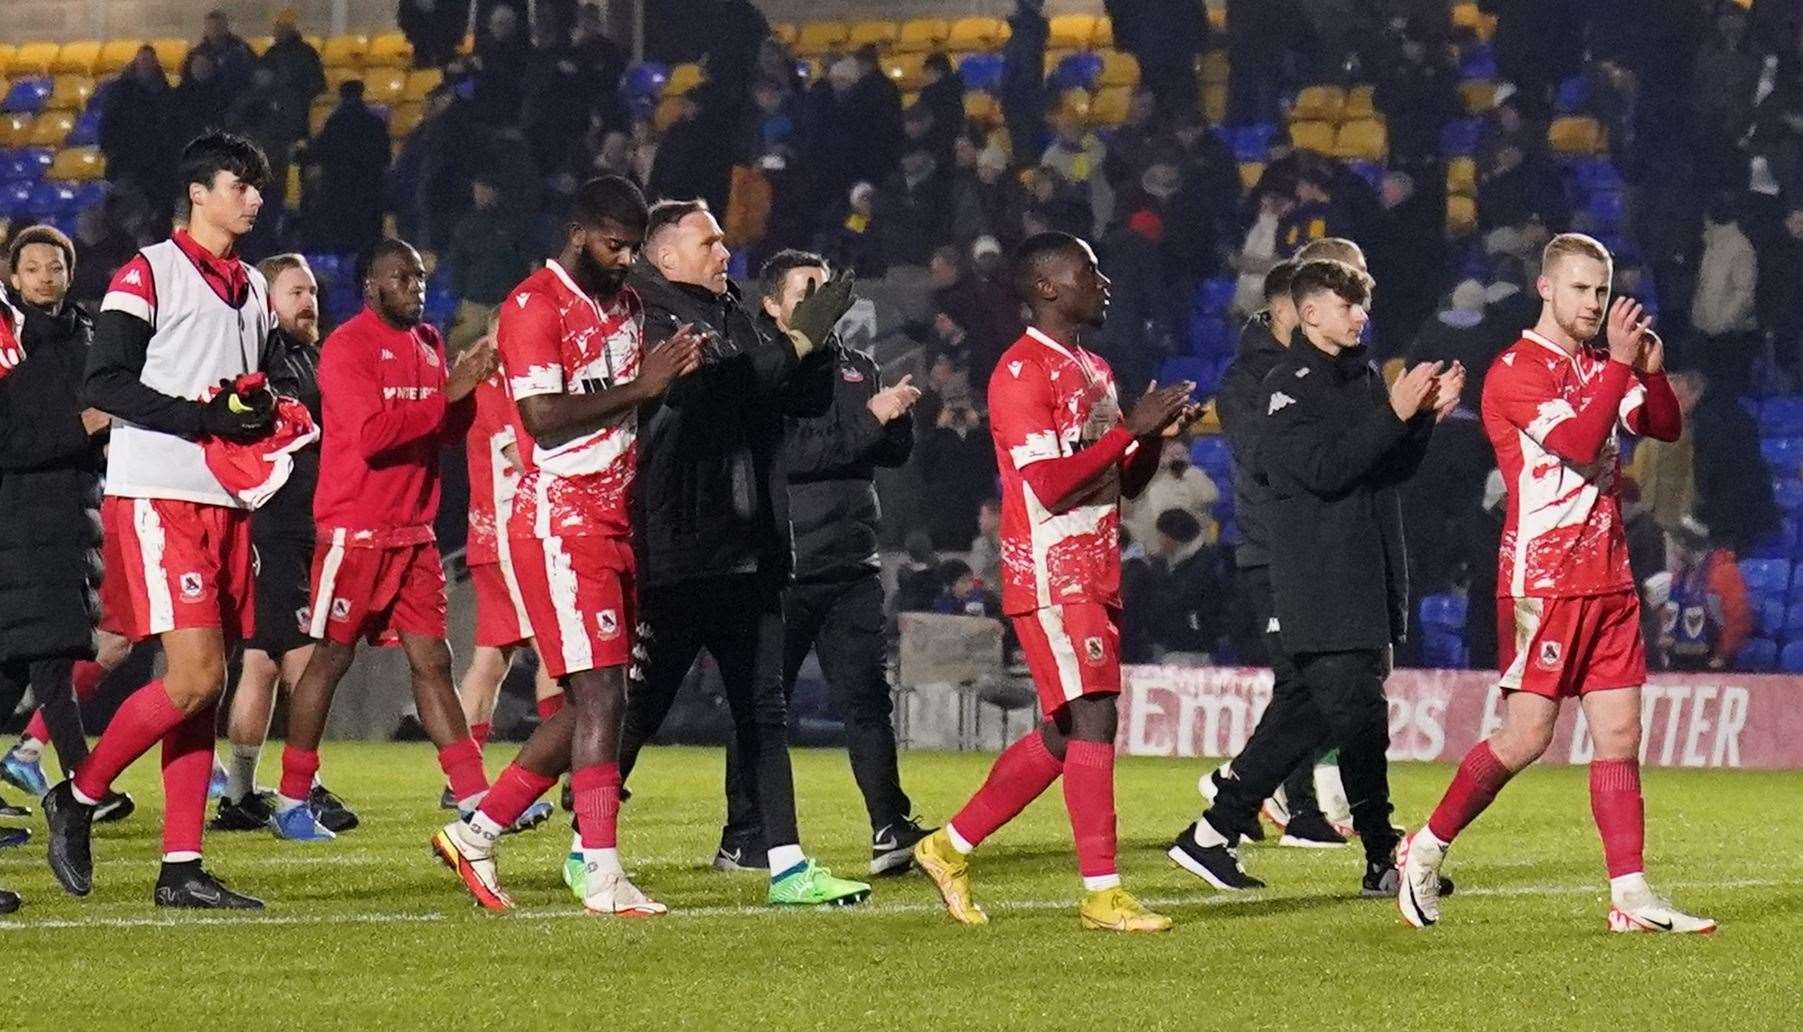 Ramsgate players thank the travelling fans after their FA Cup exit at AFC Wimbledon. Picture: PA Images